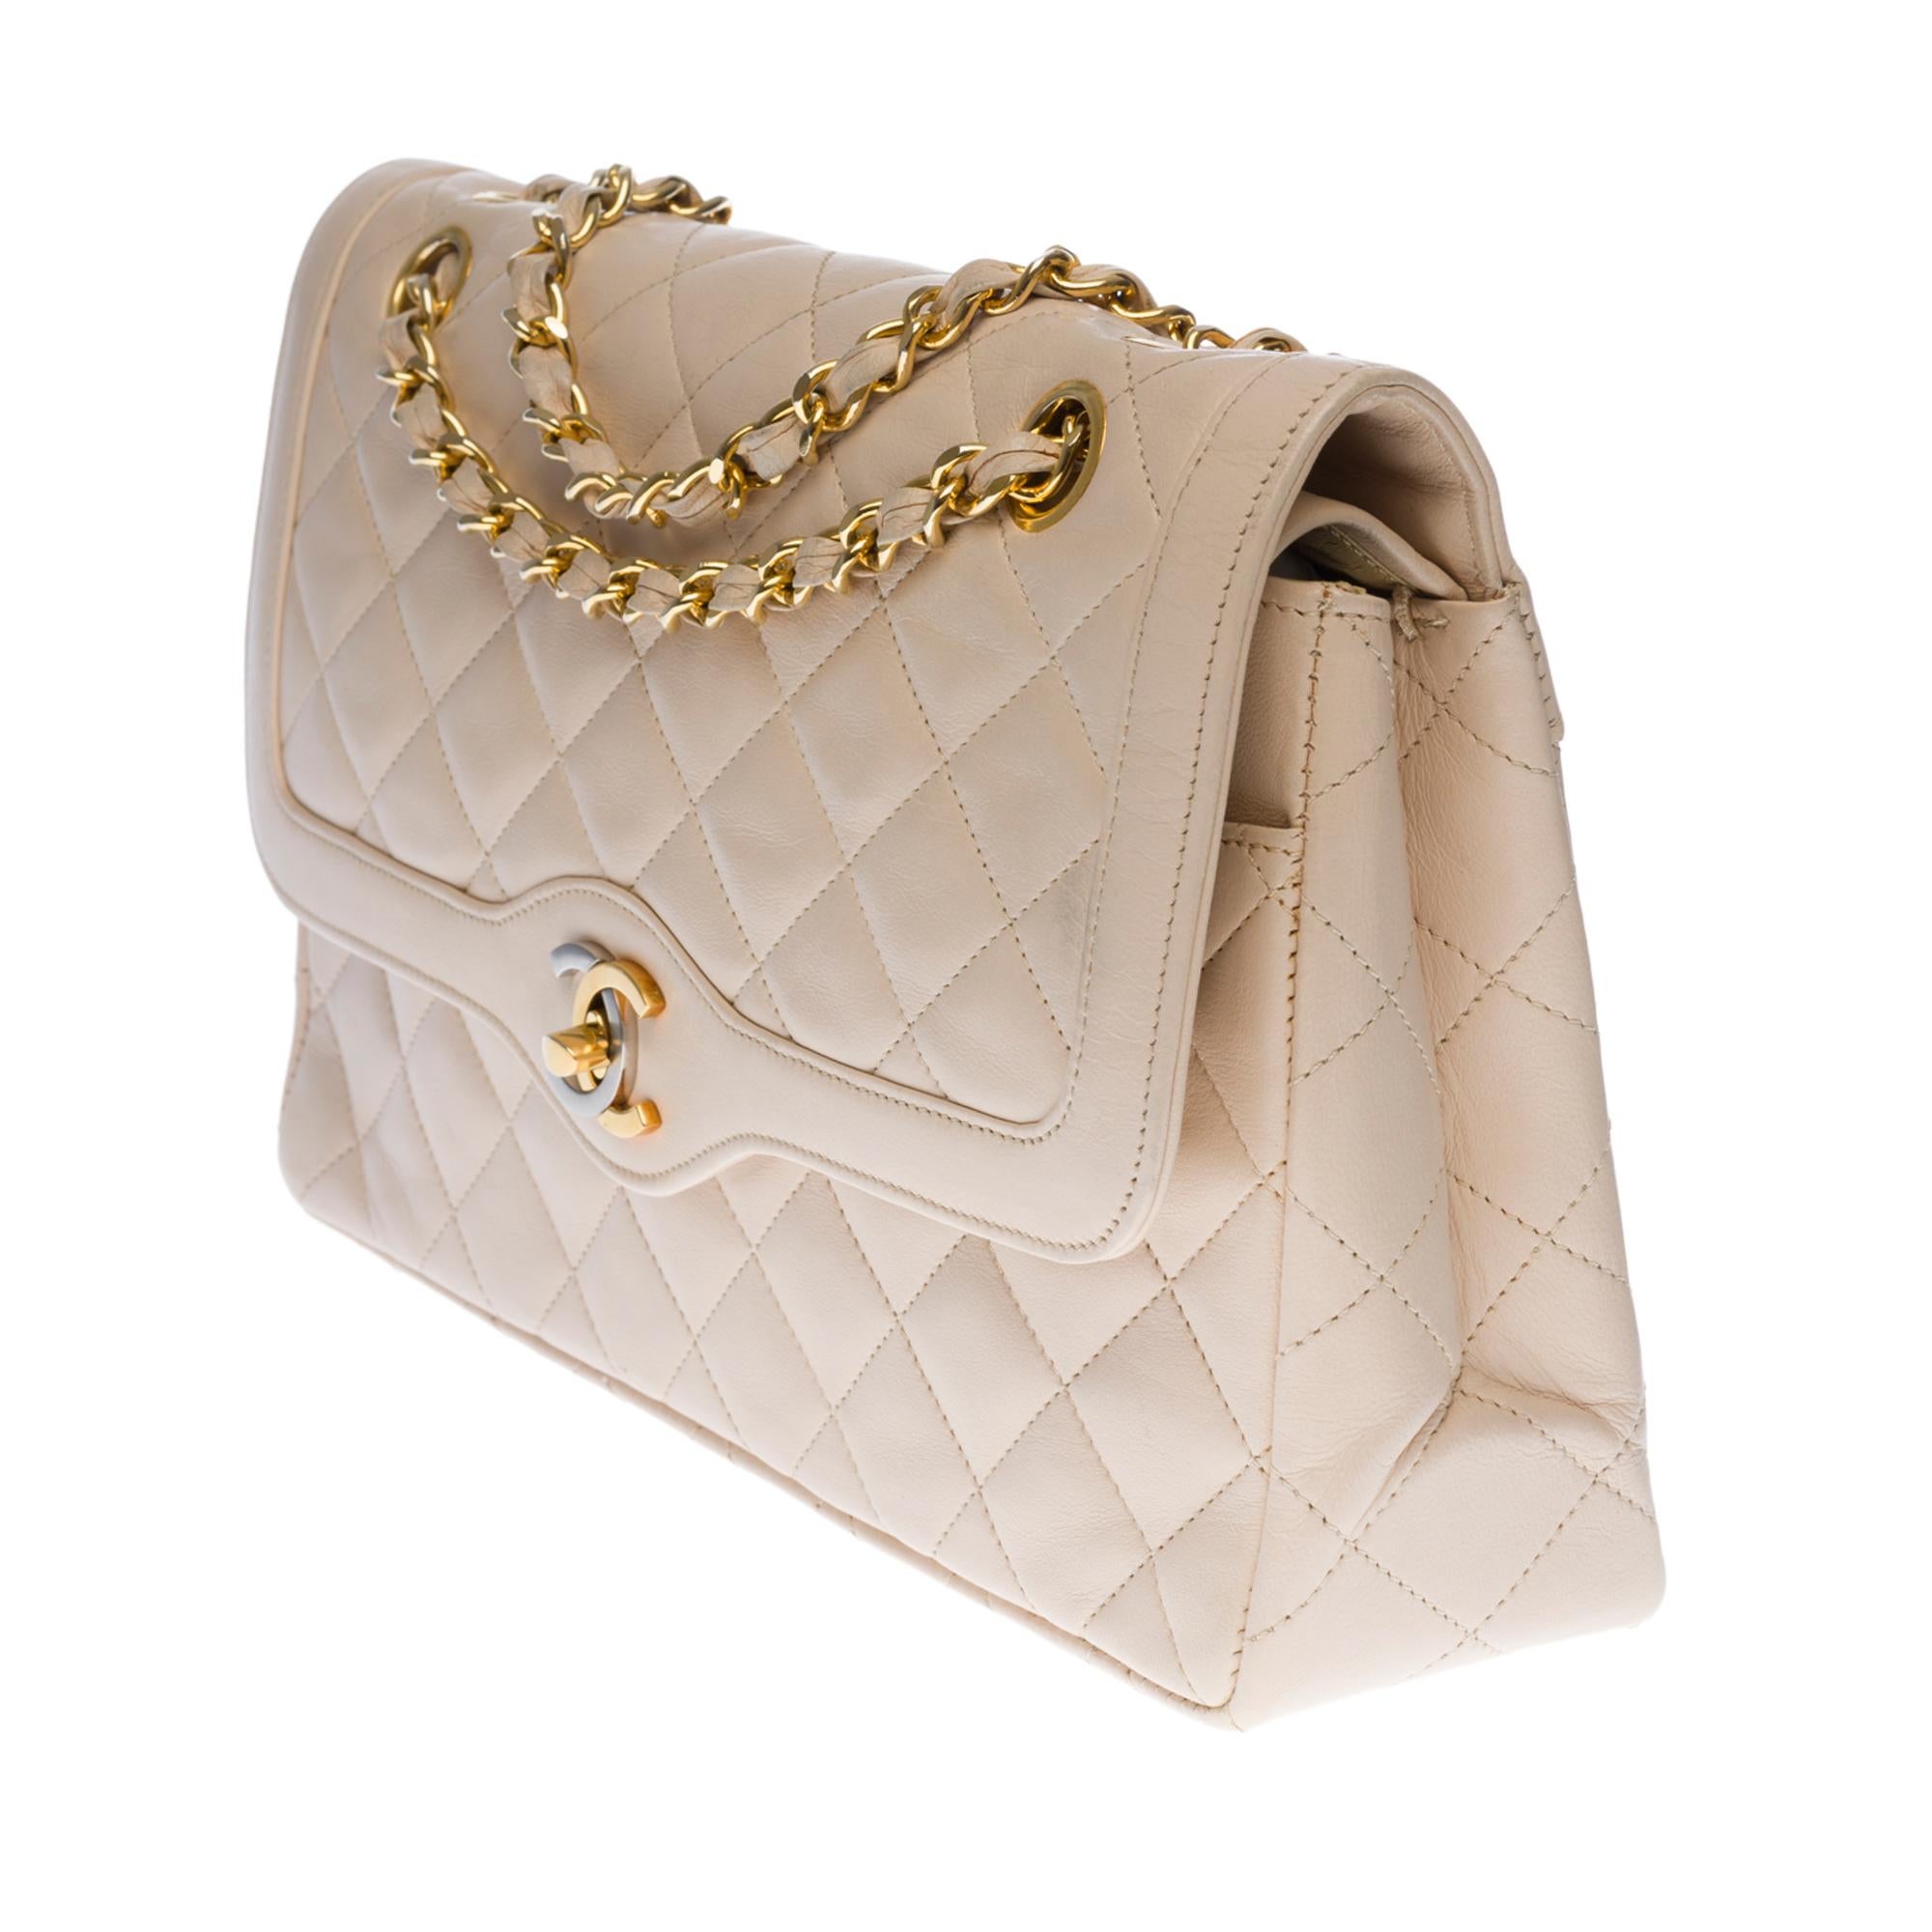 Beige Rare Chanel Classic Double Flap shoulder bag in beige quilted leather and GHW